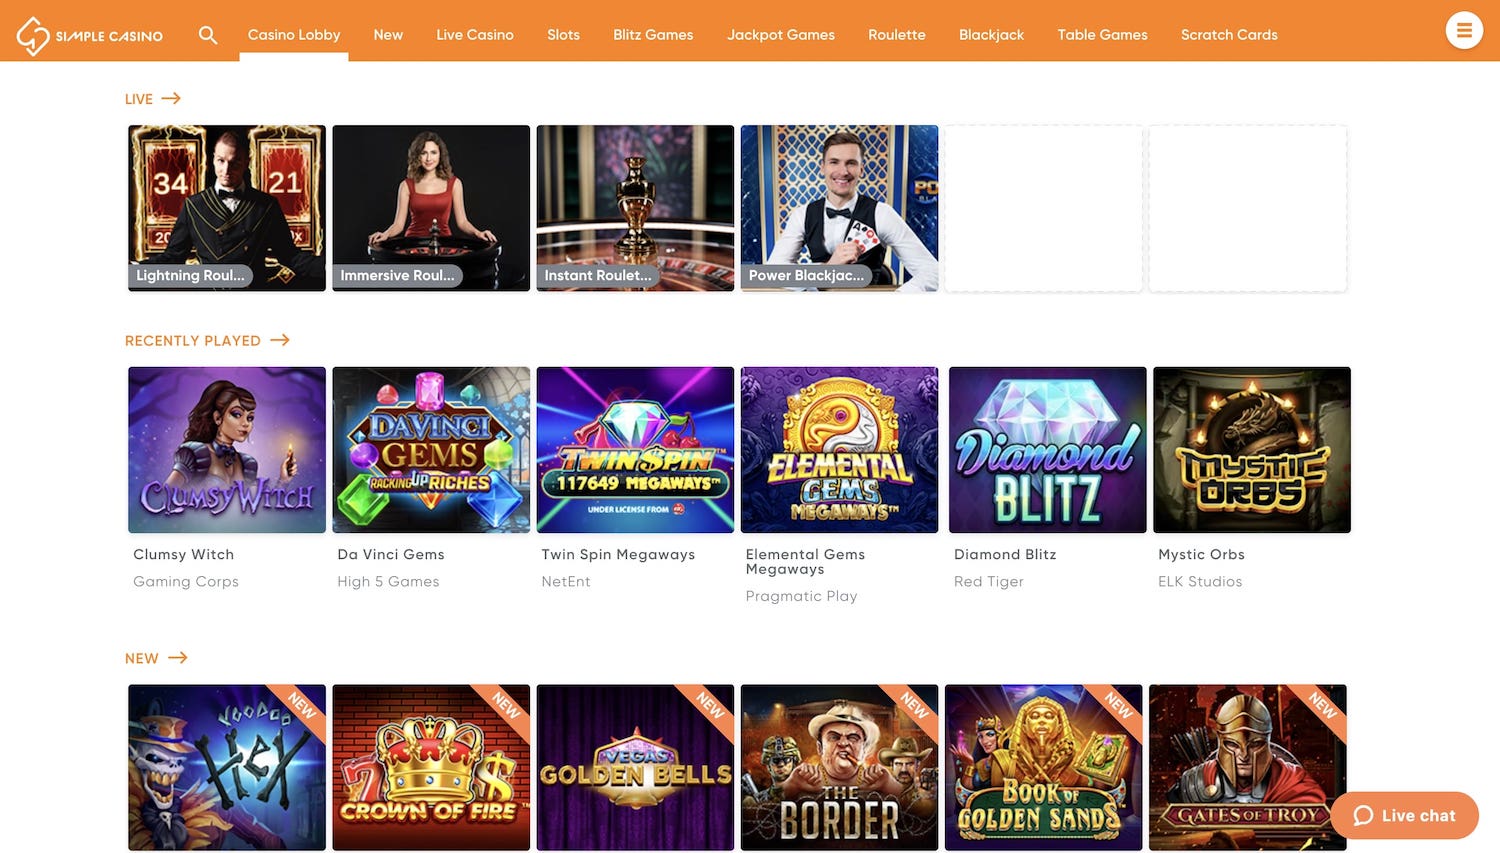 Official website of the Simple Casino